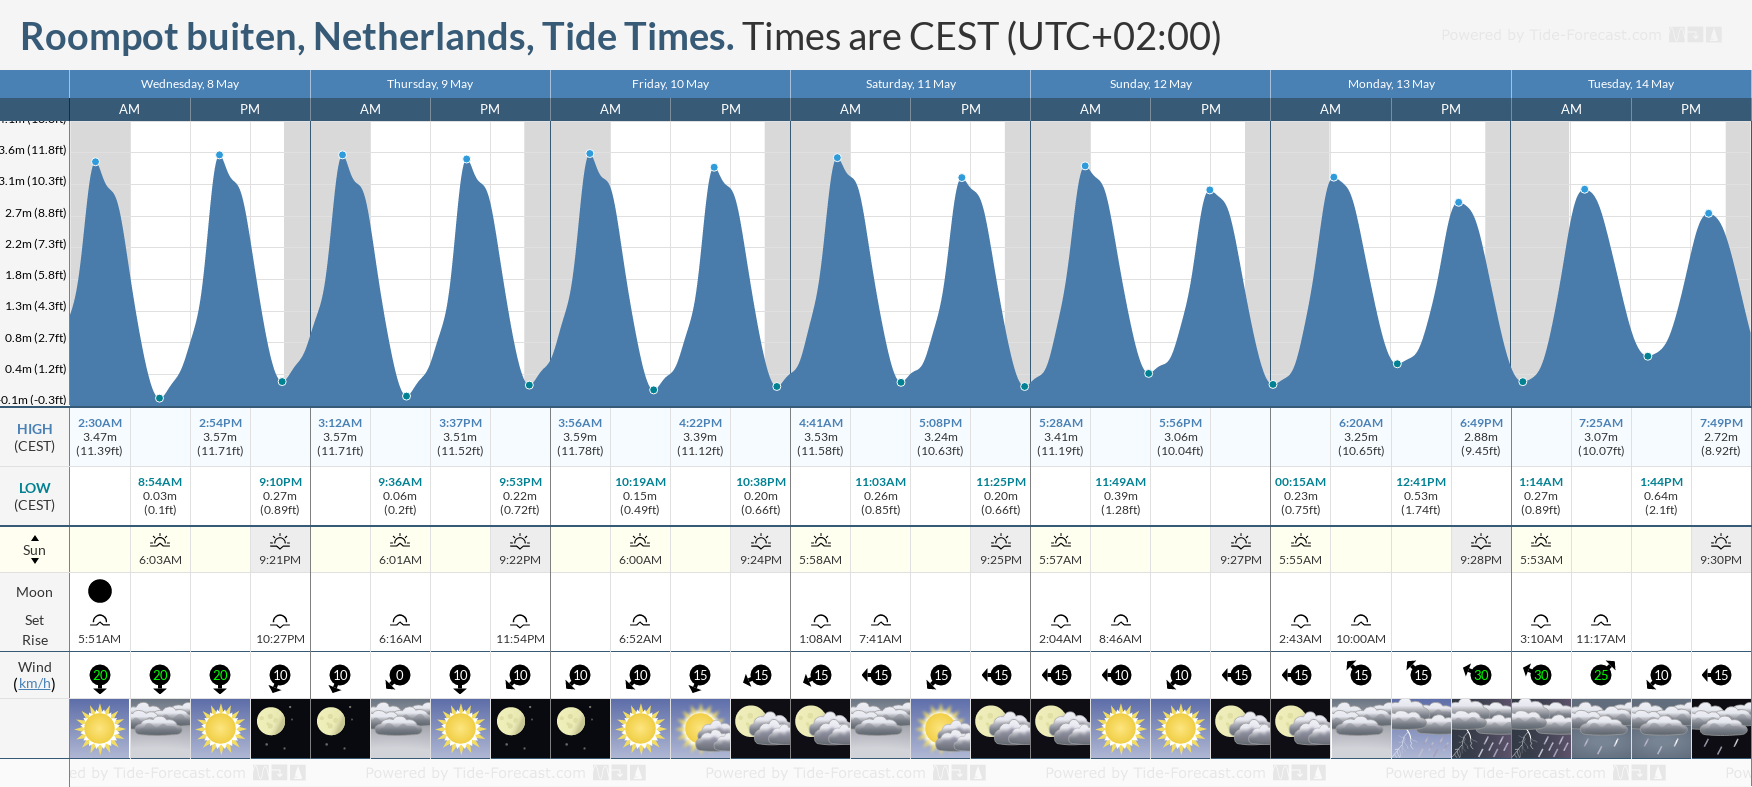 Roompot buiten, Netherlands Tide Chart including high and low tide tide times for the next 7 days